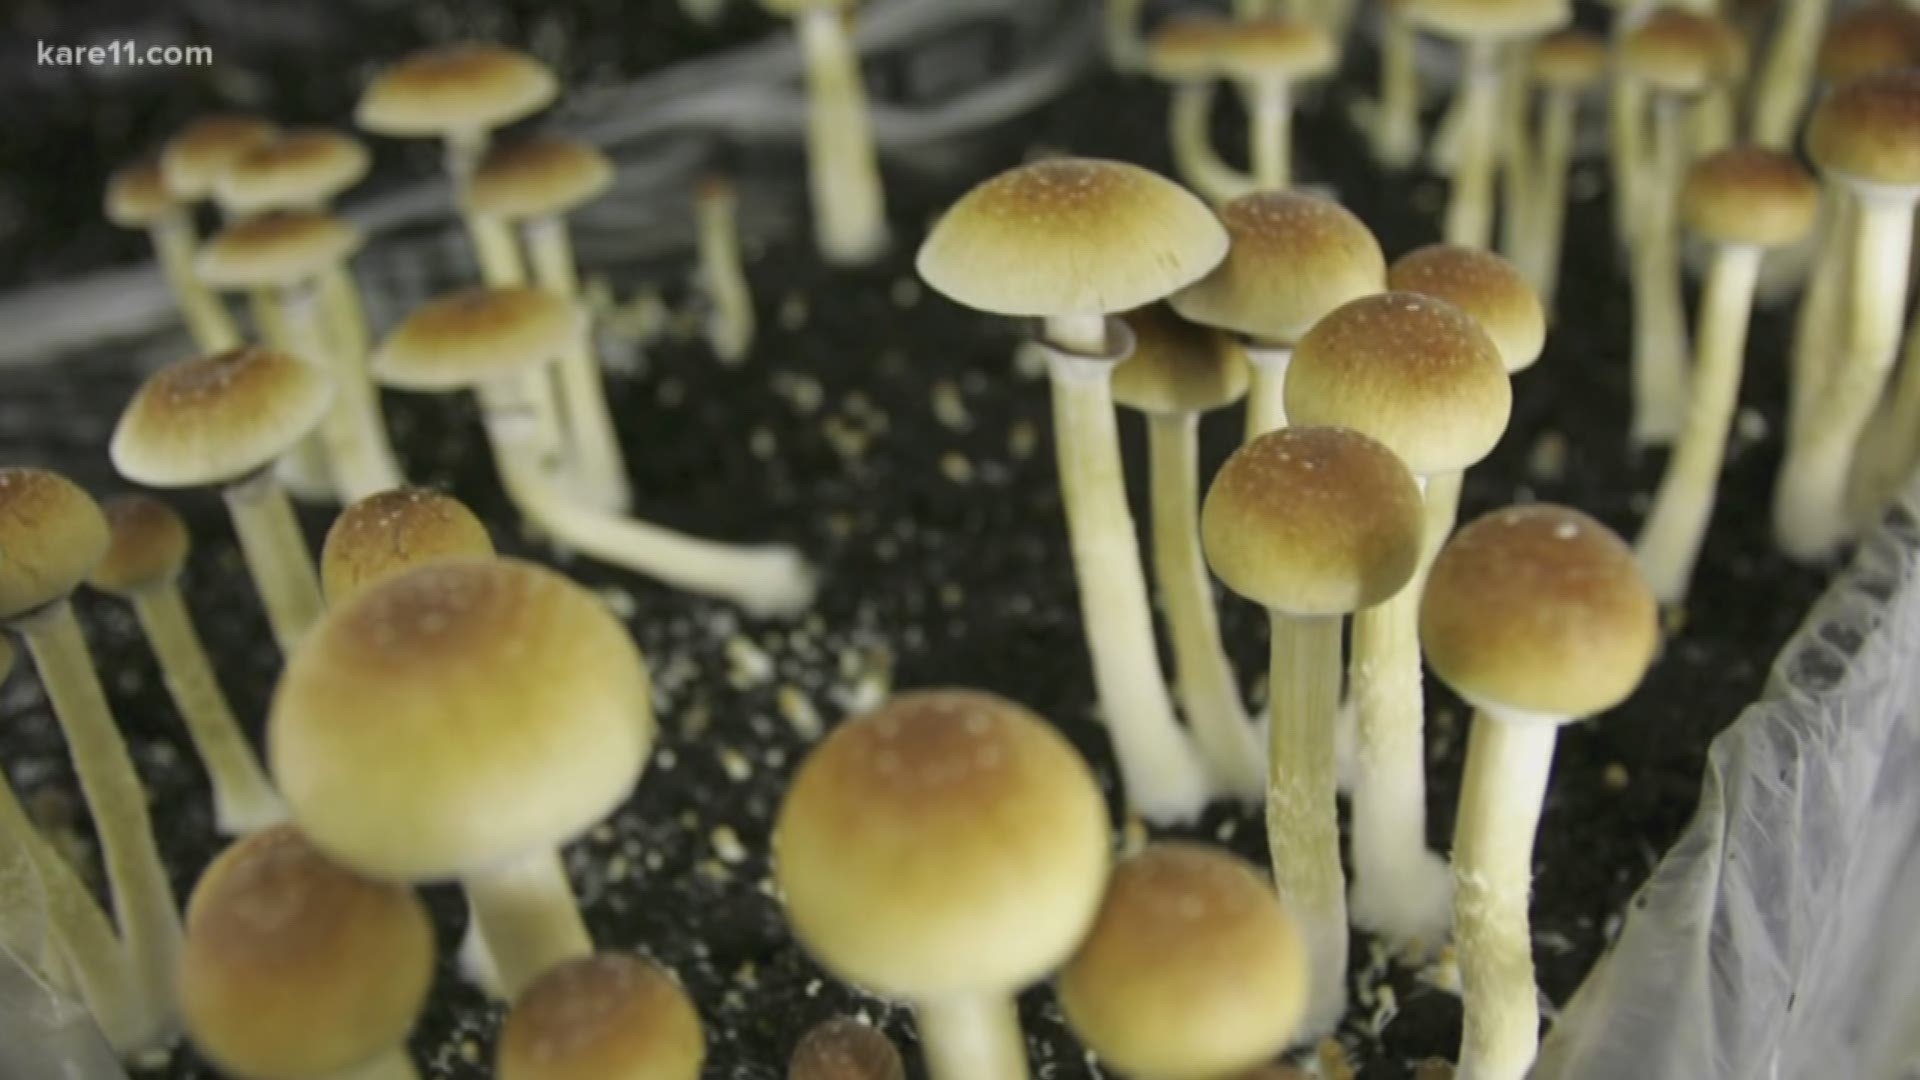 A world-renowned medical school will begin studying the potential medicinal effects of psychedelic drugs.